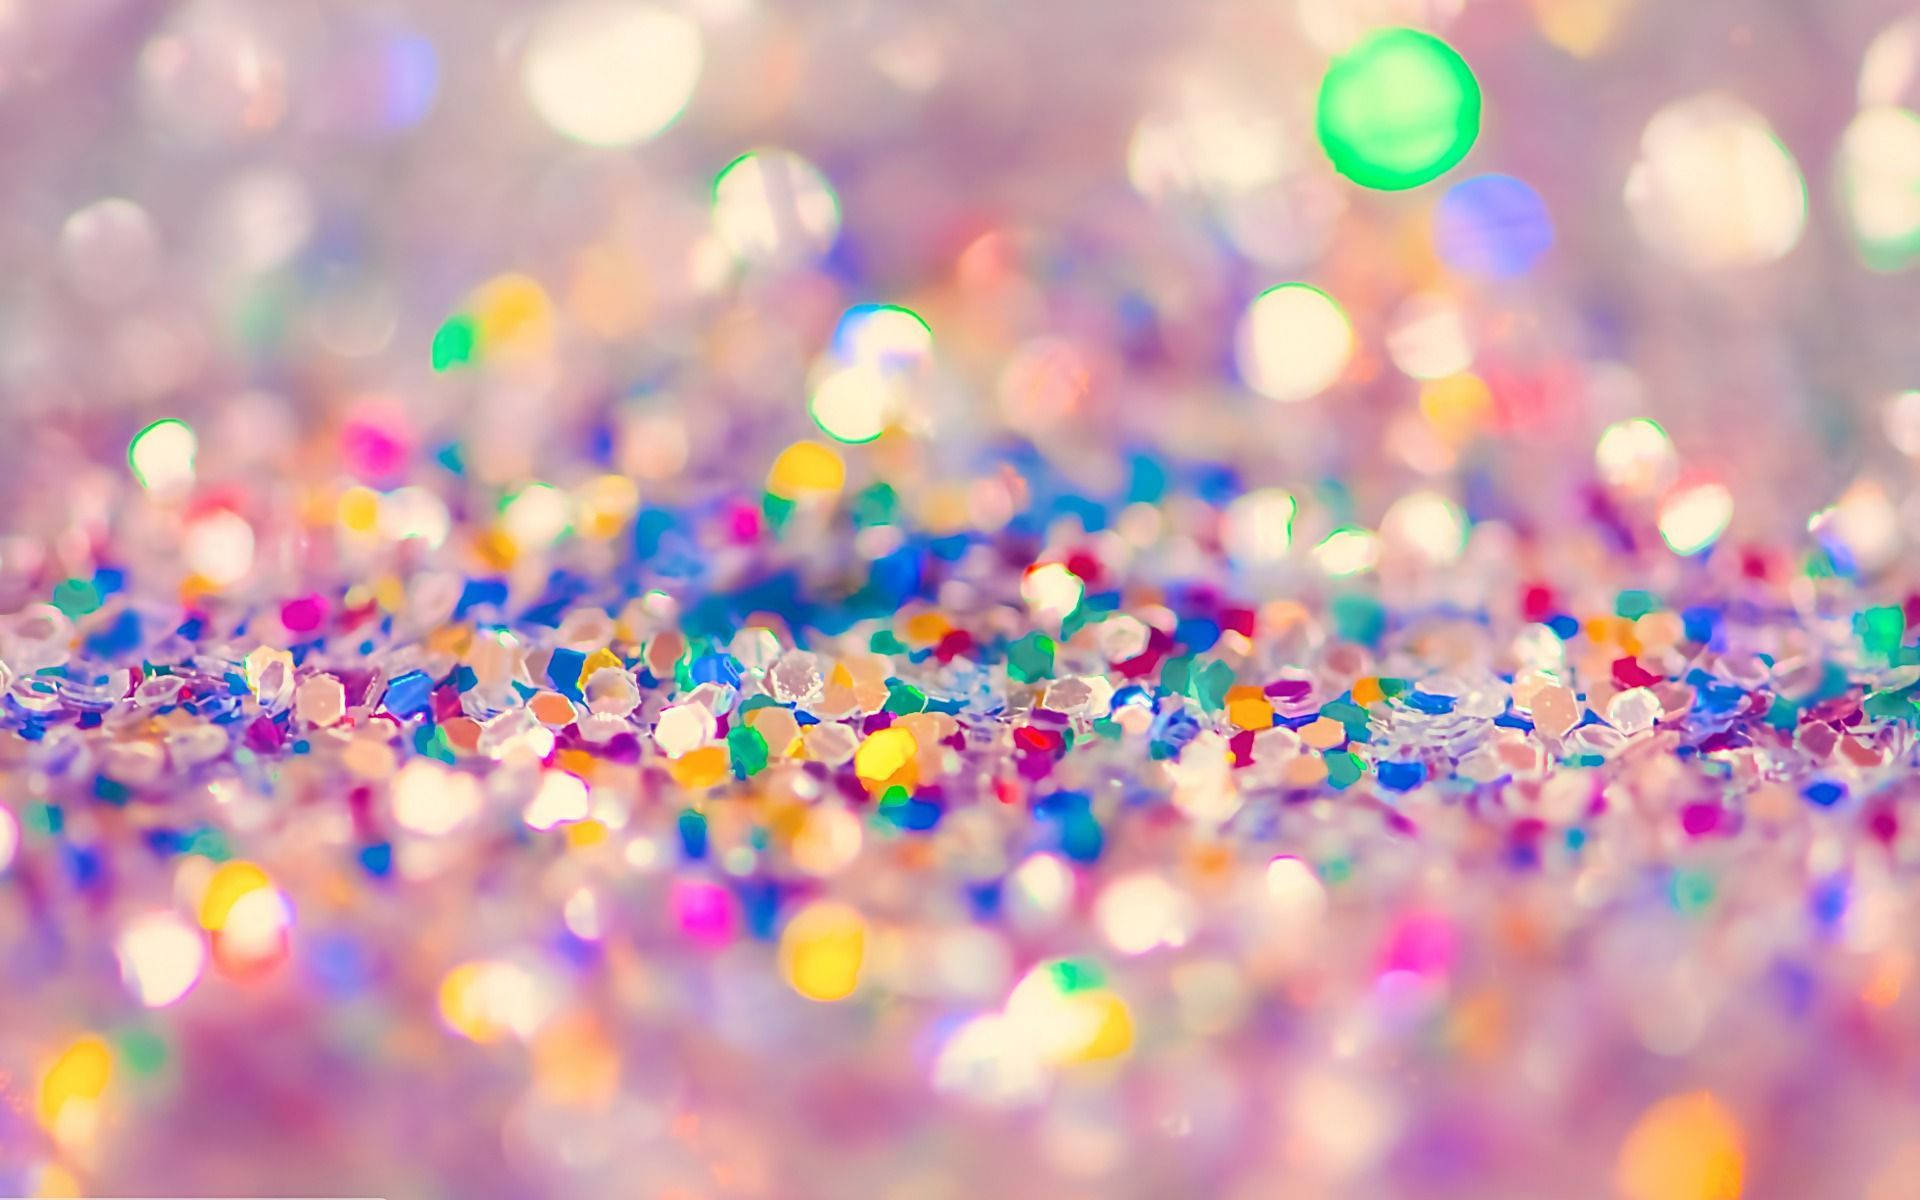 Enjoy The Vibrancy Of Life With Beautiful Desktop Colorful Glitters Background